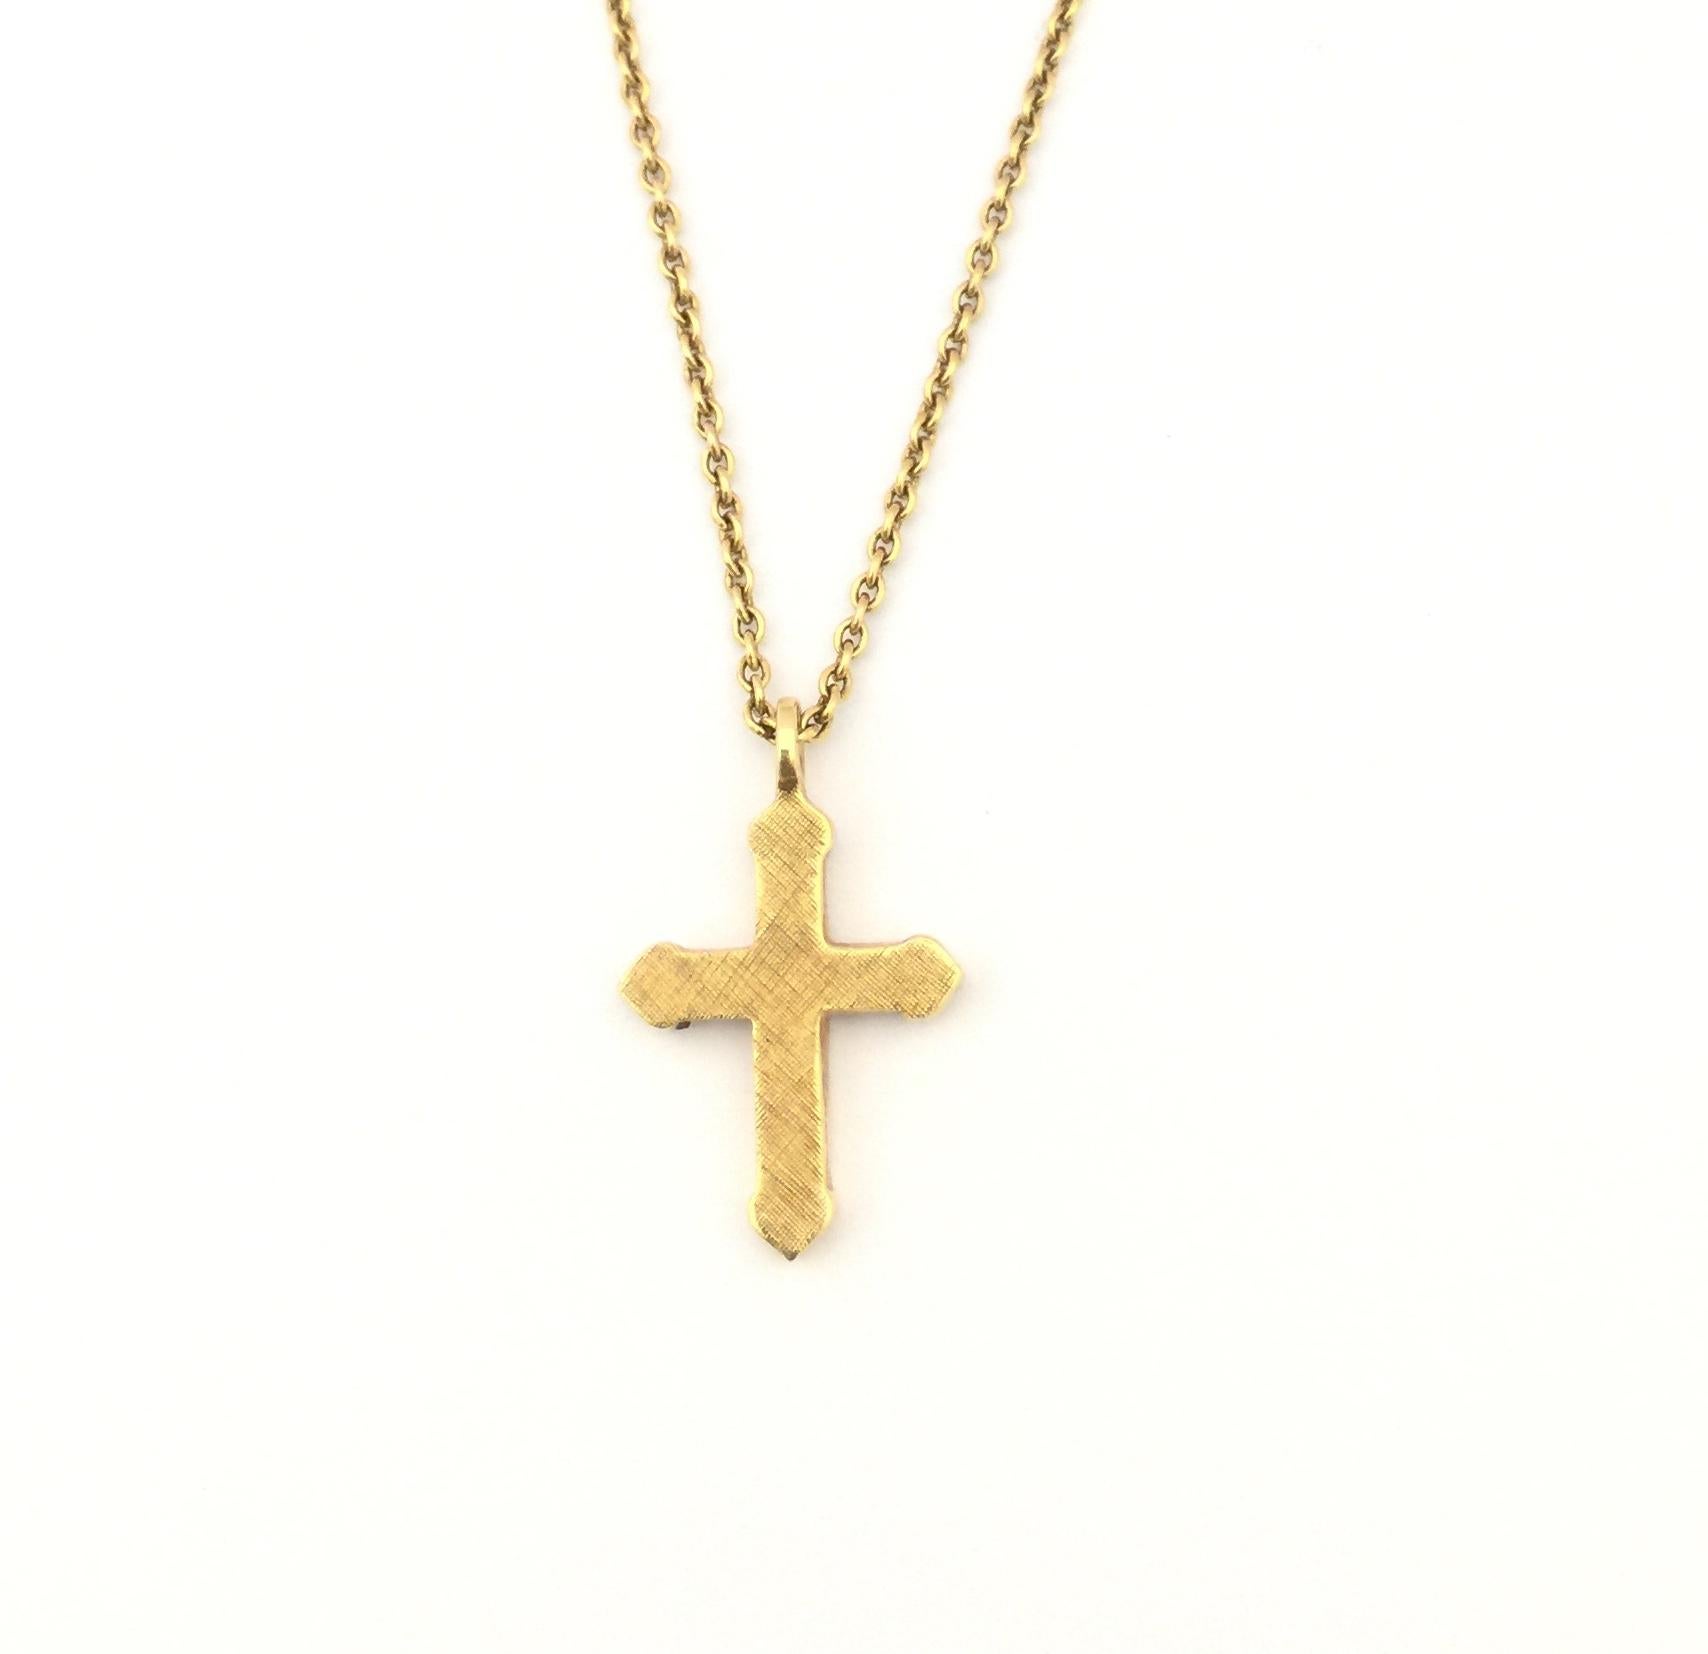 Faberge Cross Necklace.
18k Yellow Gold 
Red Enamel
Diamonds 0.10cts
Length 16 inches 
F2241AR